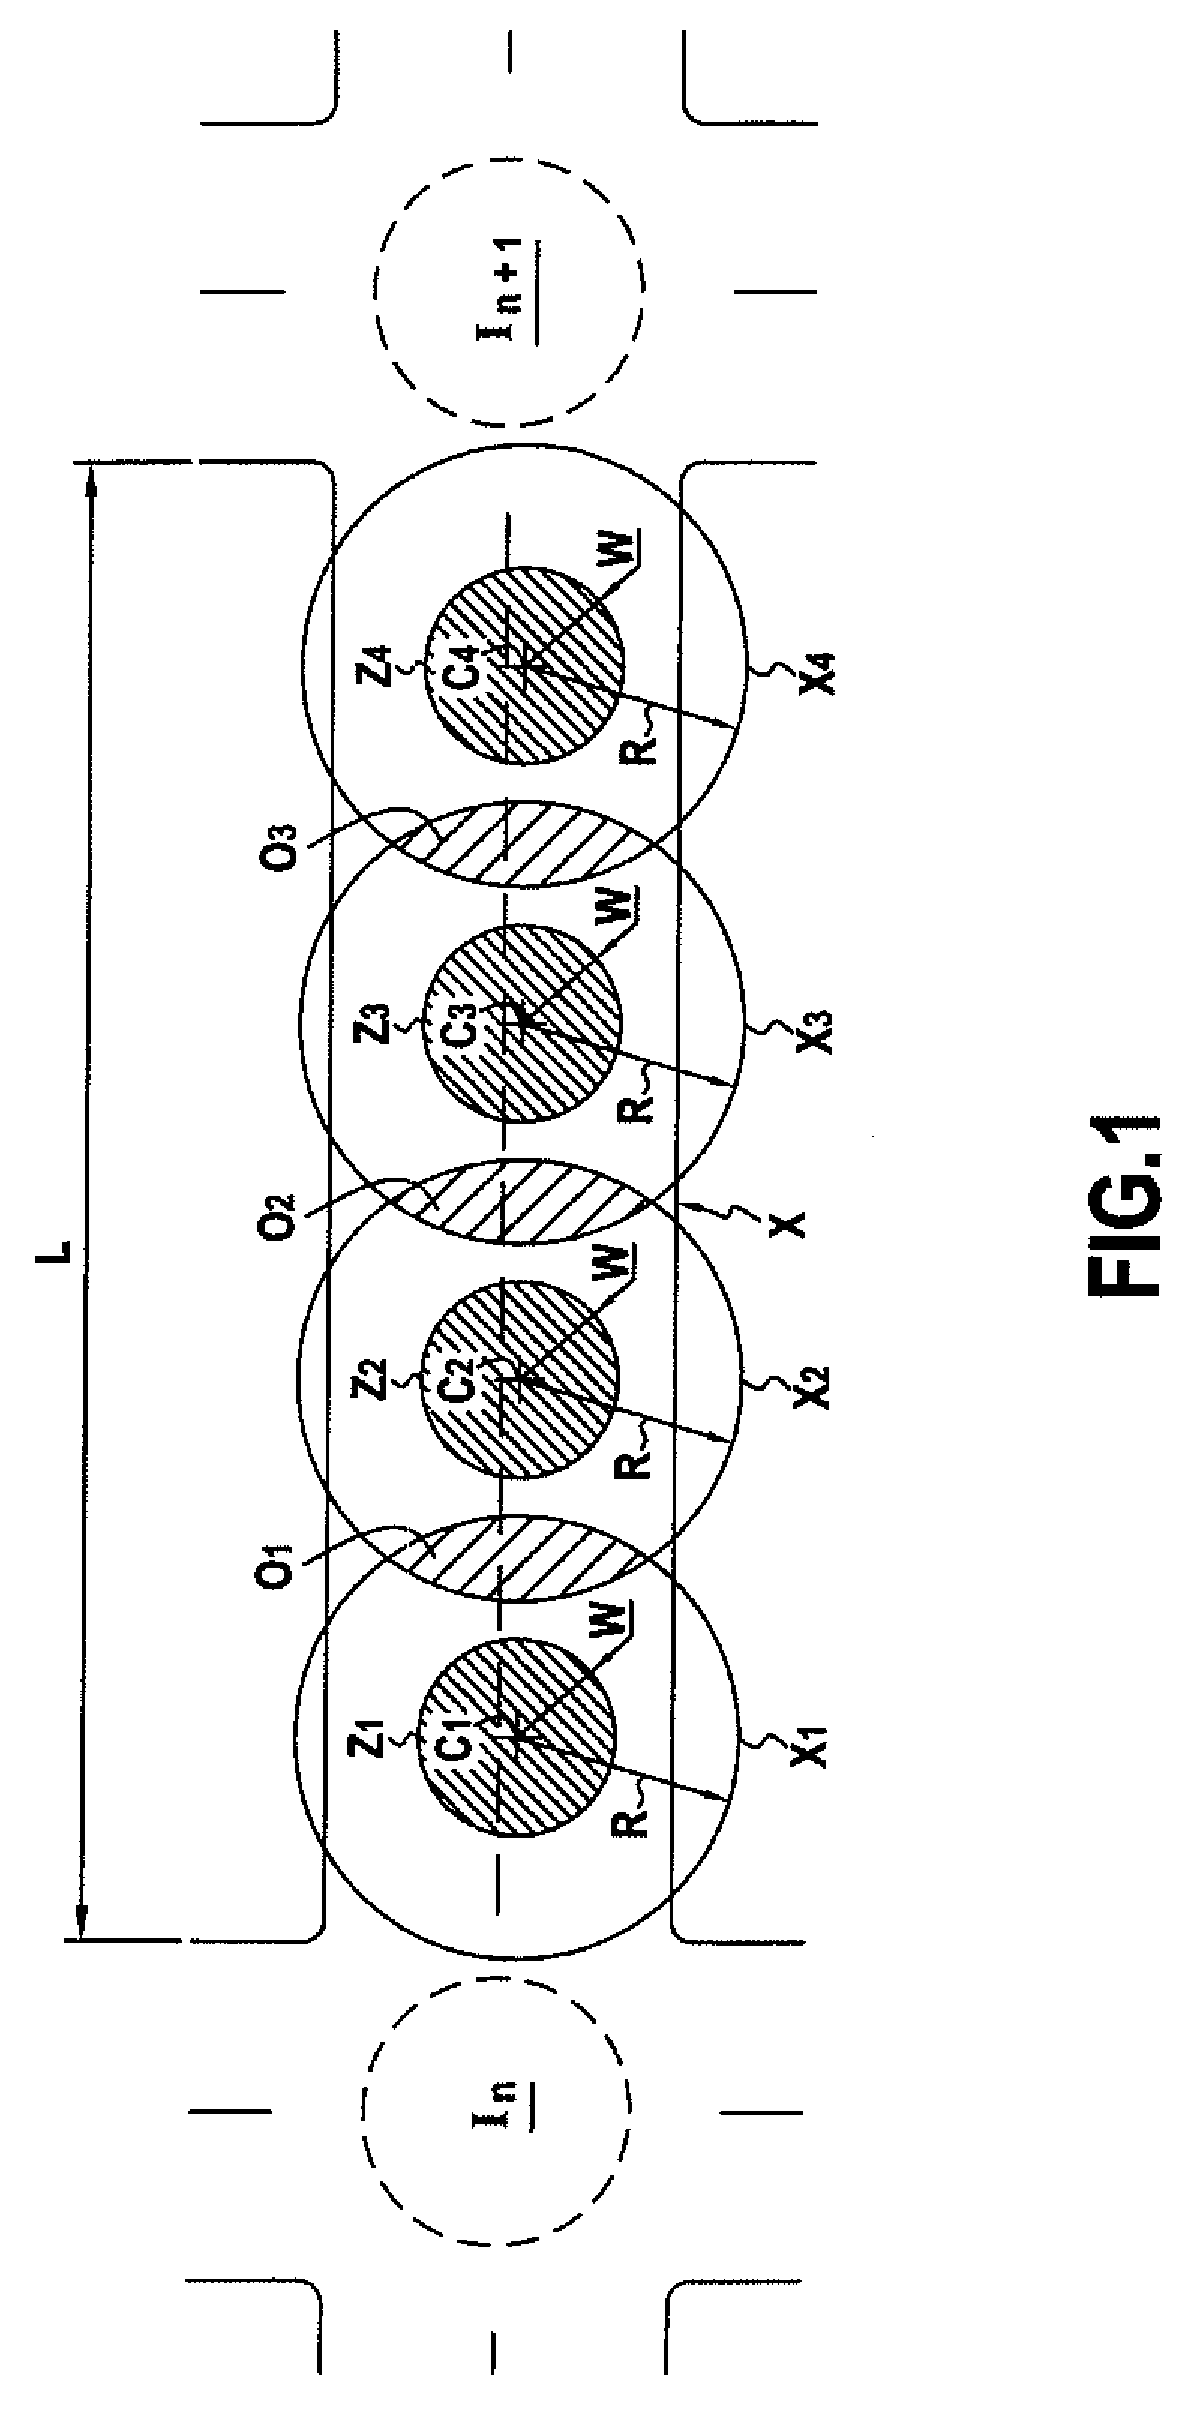 Method for estimating and signalling the density of mobile nodes in a road network